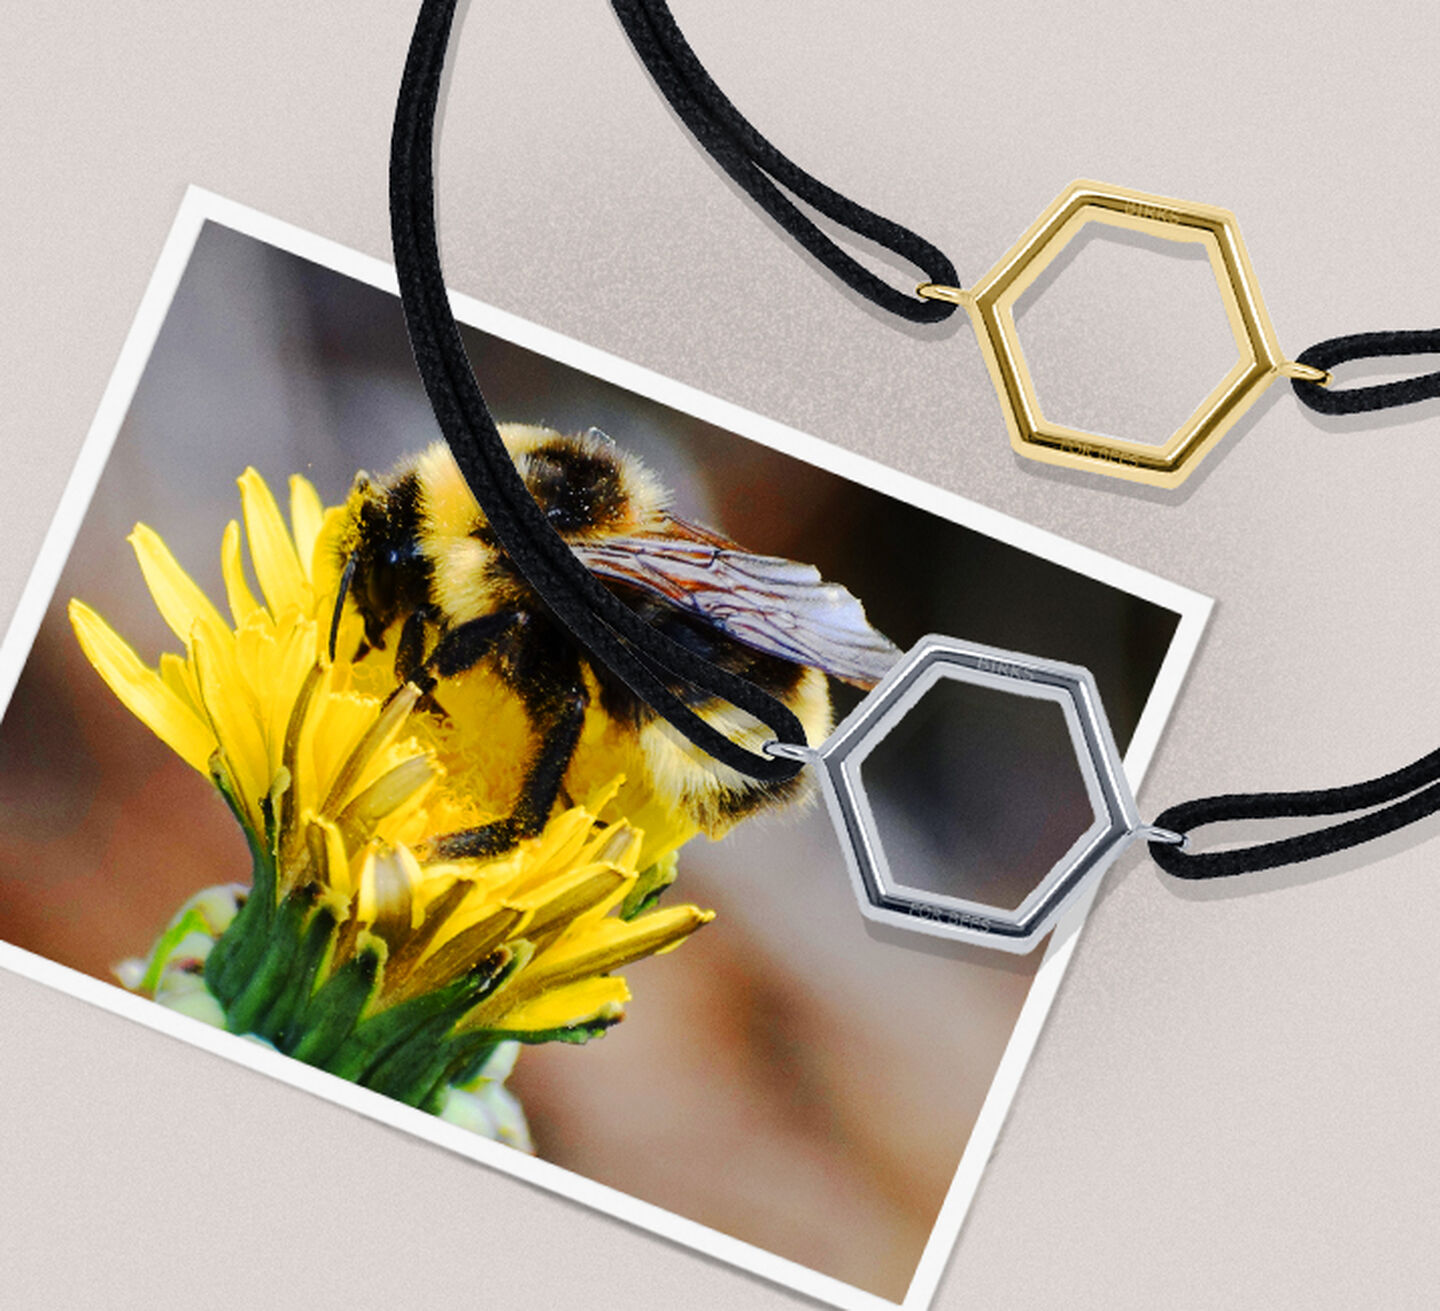 Gold and Silver Hexagonal pendant bracelets sitting on a photo of a bee on a yellow flower